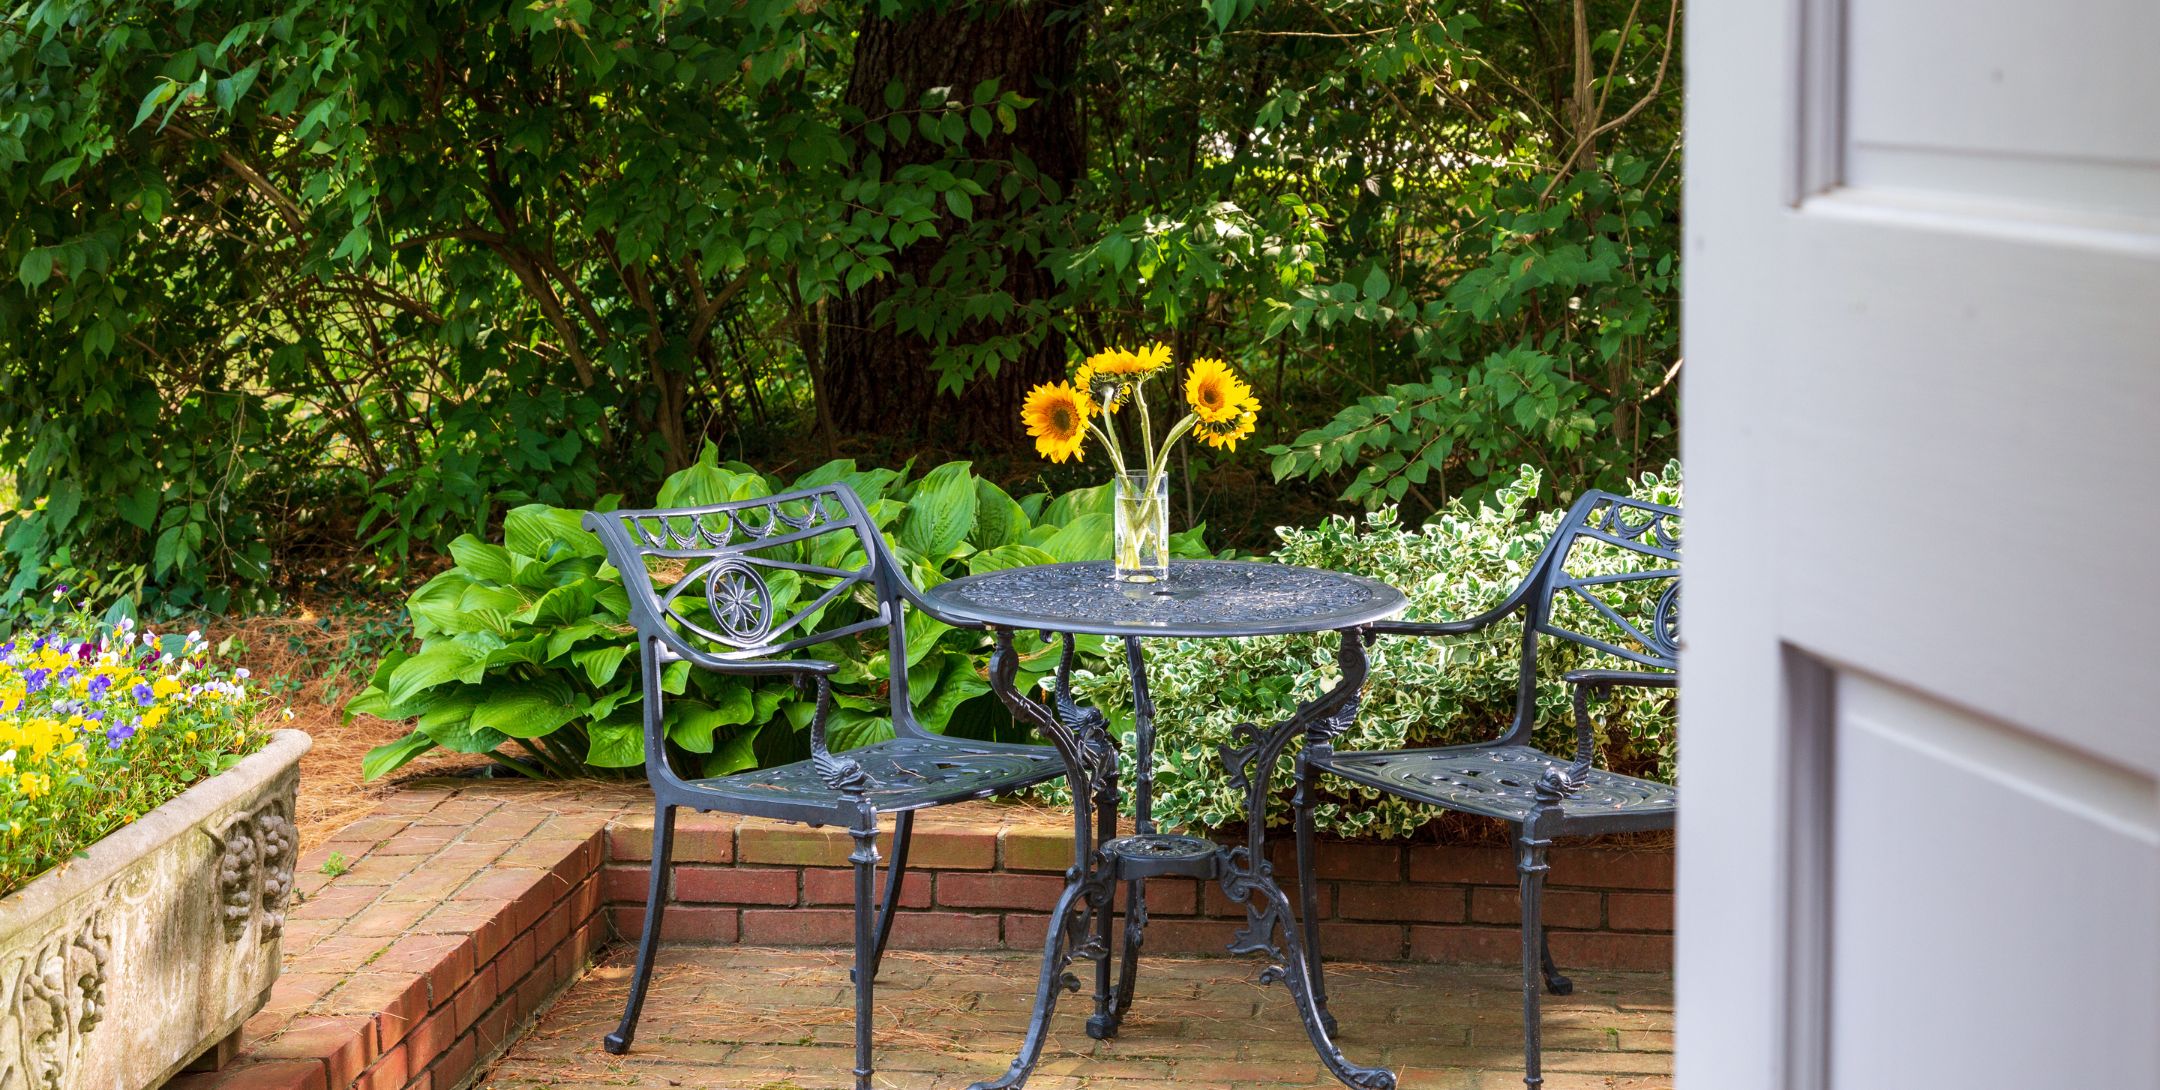 Brick patio with black metal patio table and chairs, and bright yellow sunflowers in a vase on the table